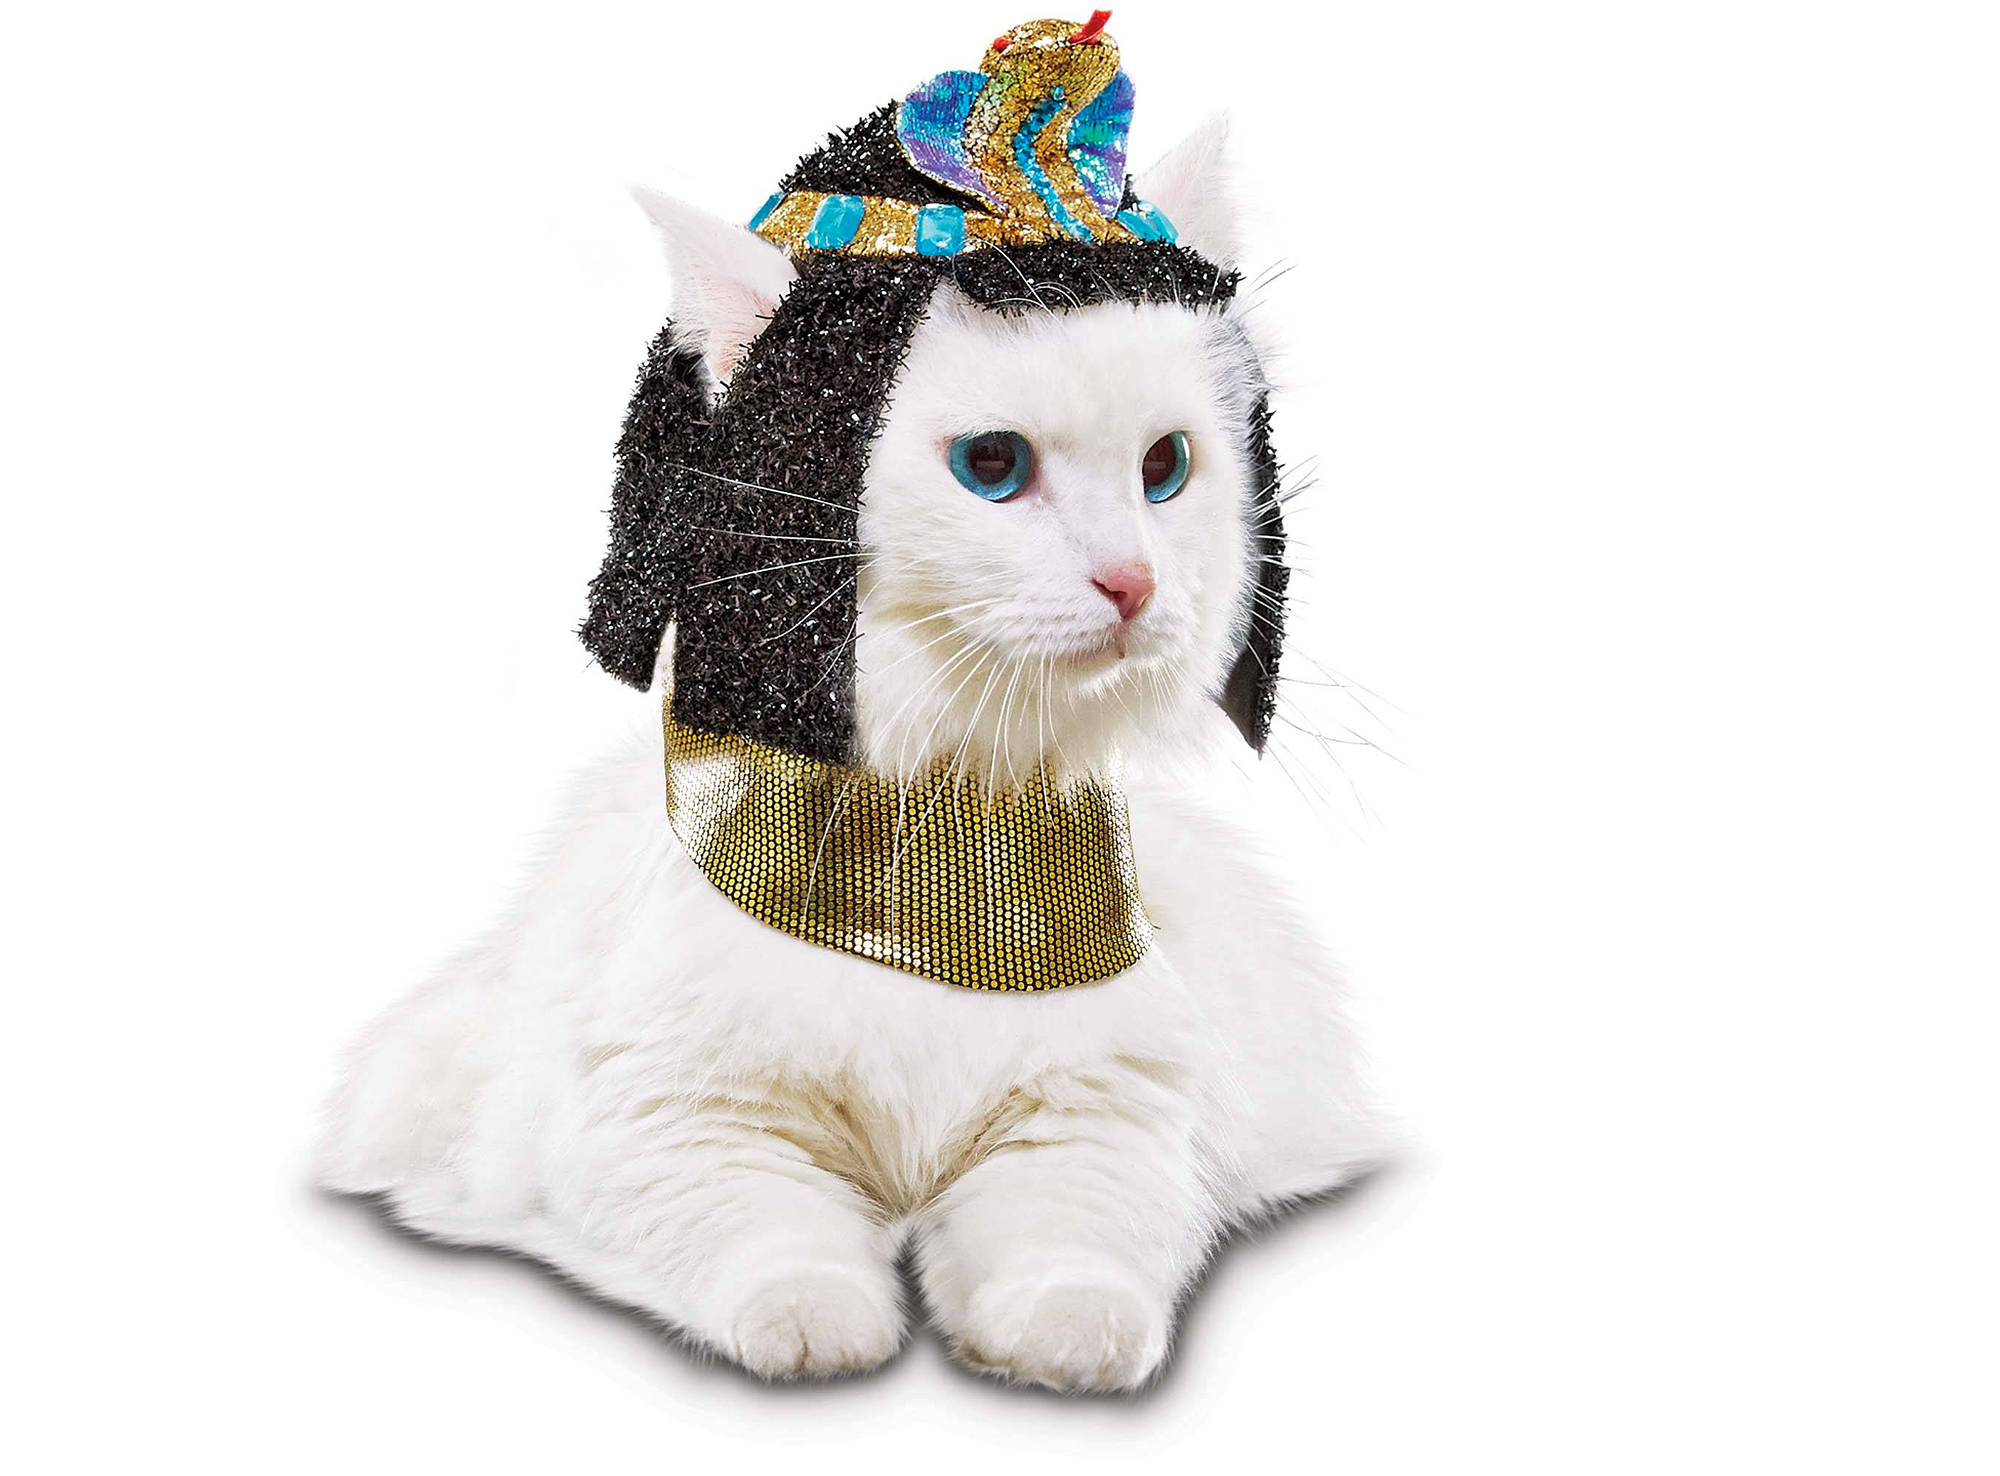 Funny Halloween Costumes for Cats | PEOPLE.com